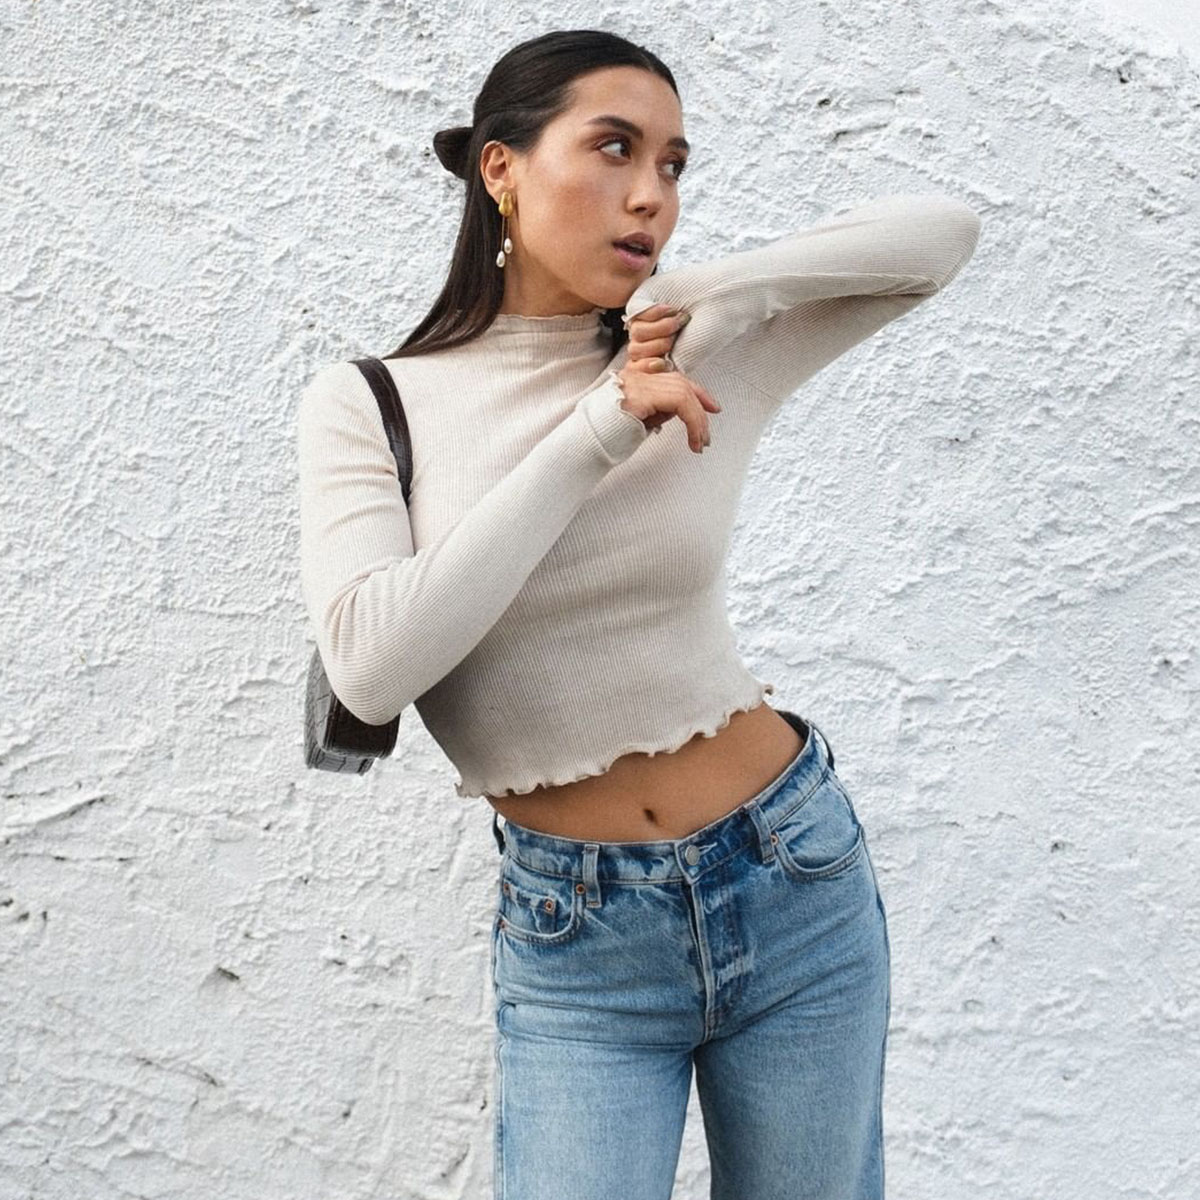 8 Stores Like Brandy Melville That You'll Love